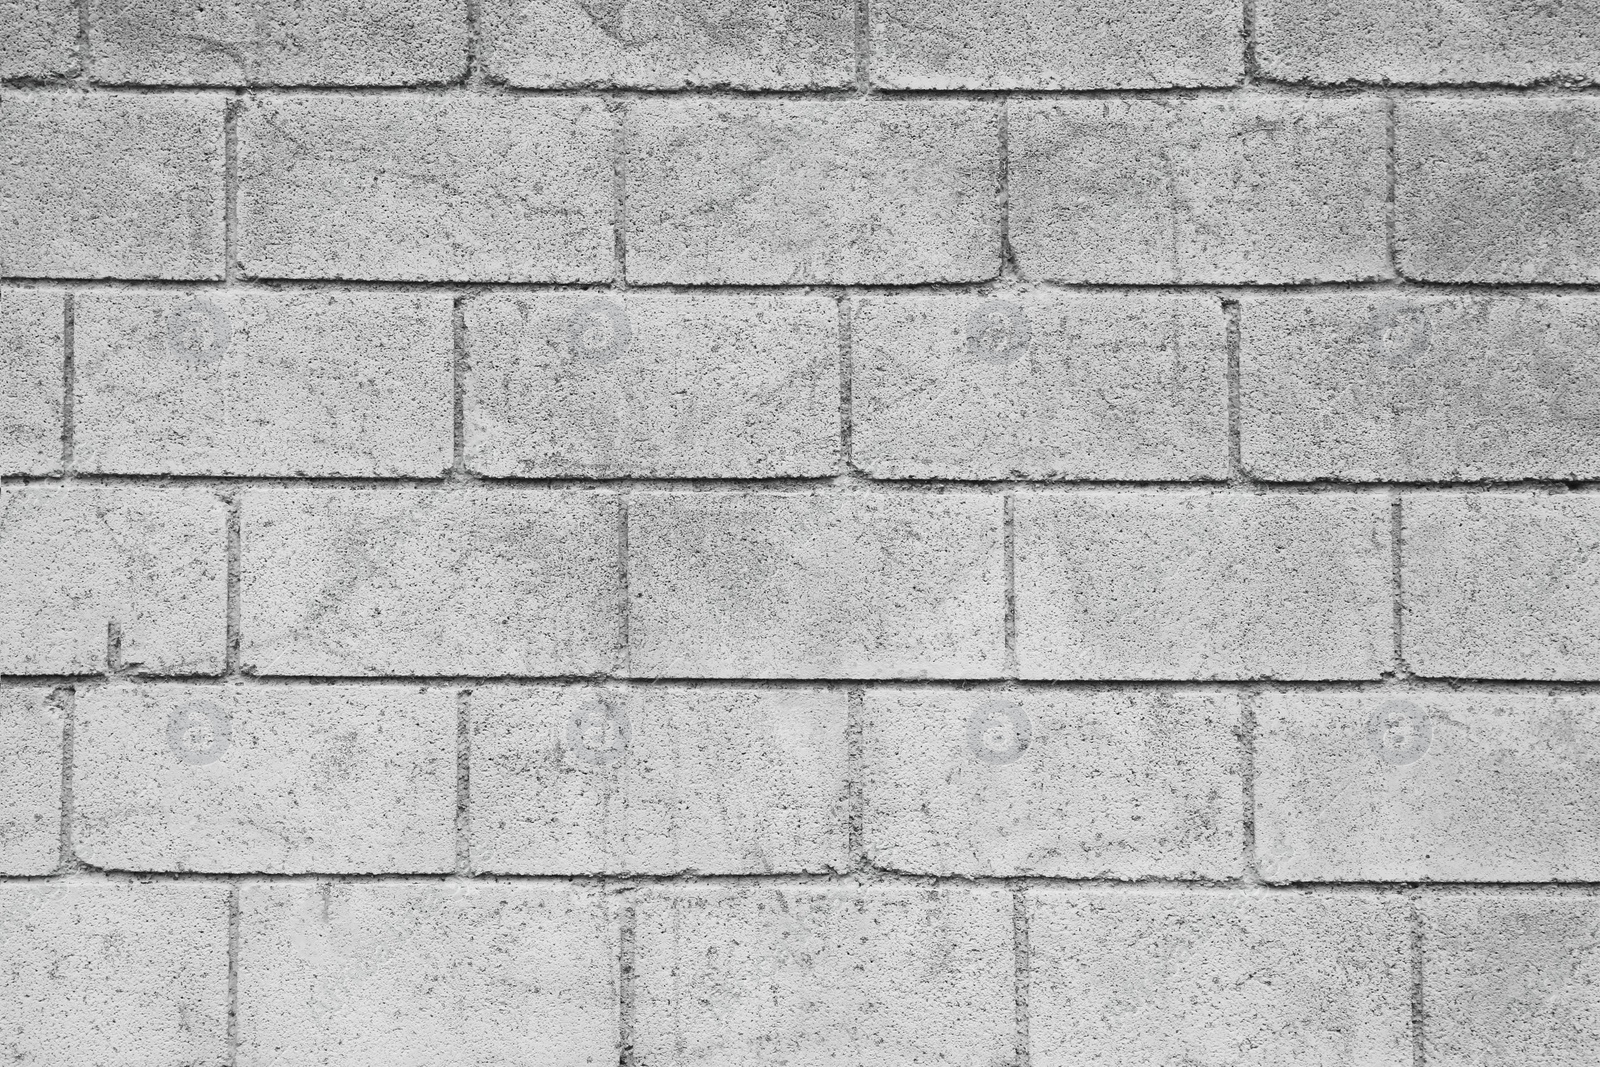 Photo of Texture of light grey brick wall as background